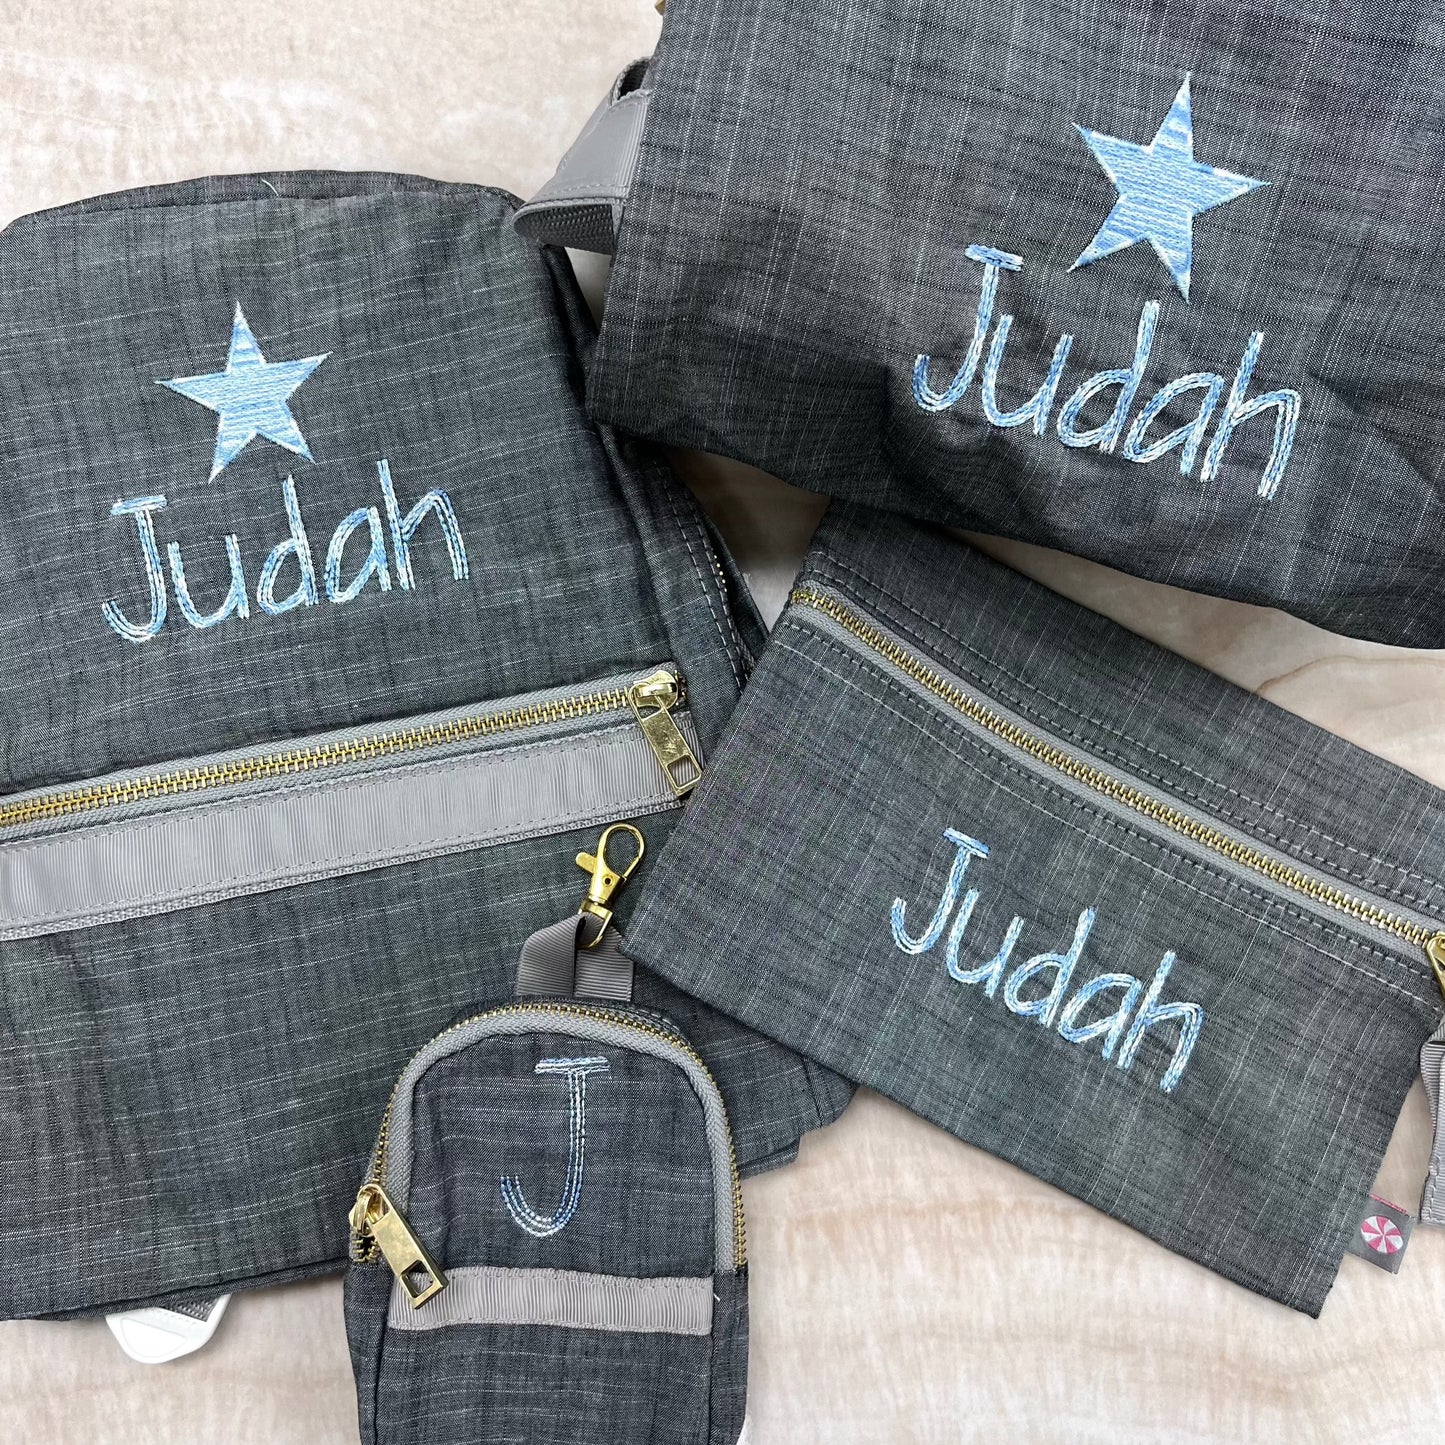 Personalized Chambray Grey Small Backpack - Give Wink